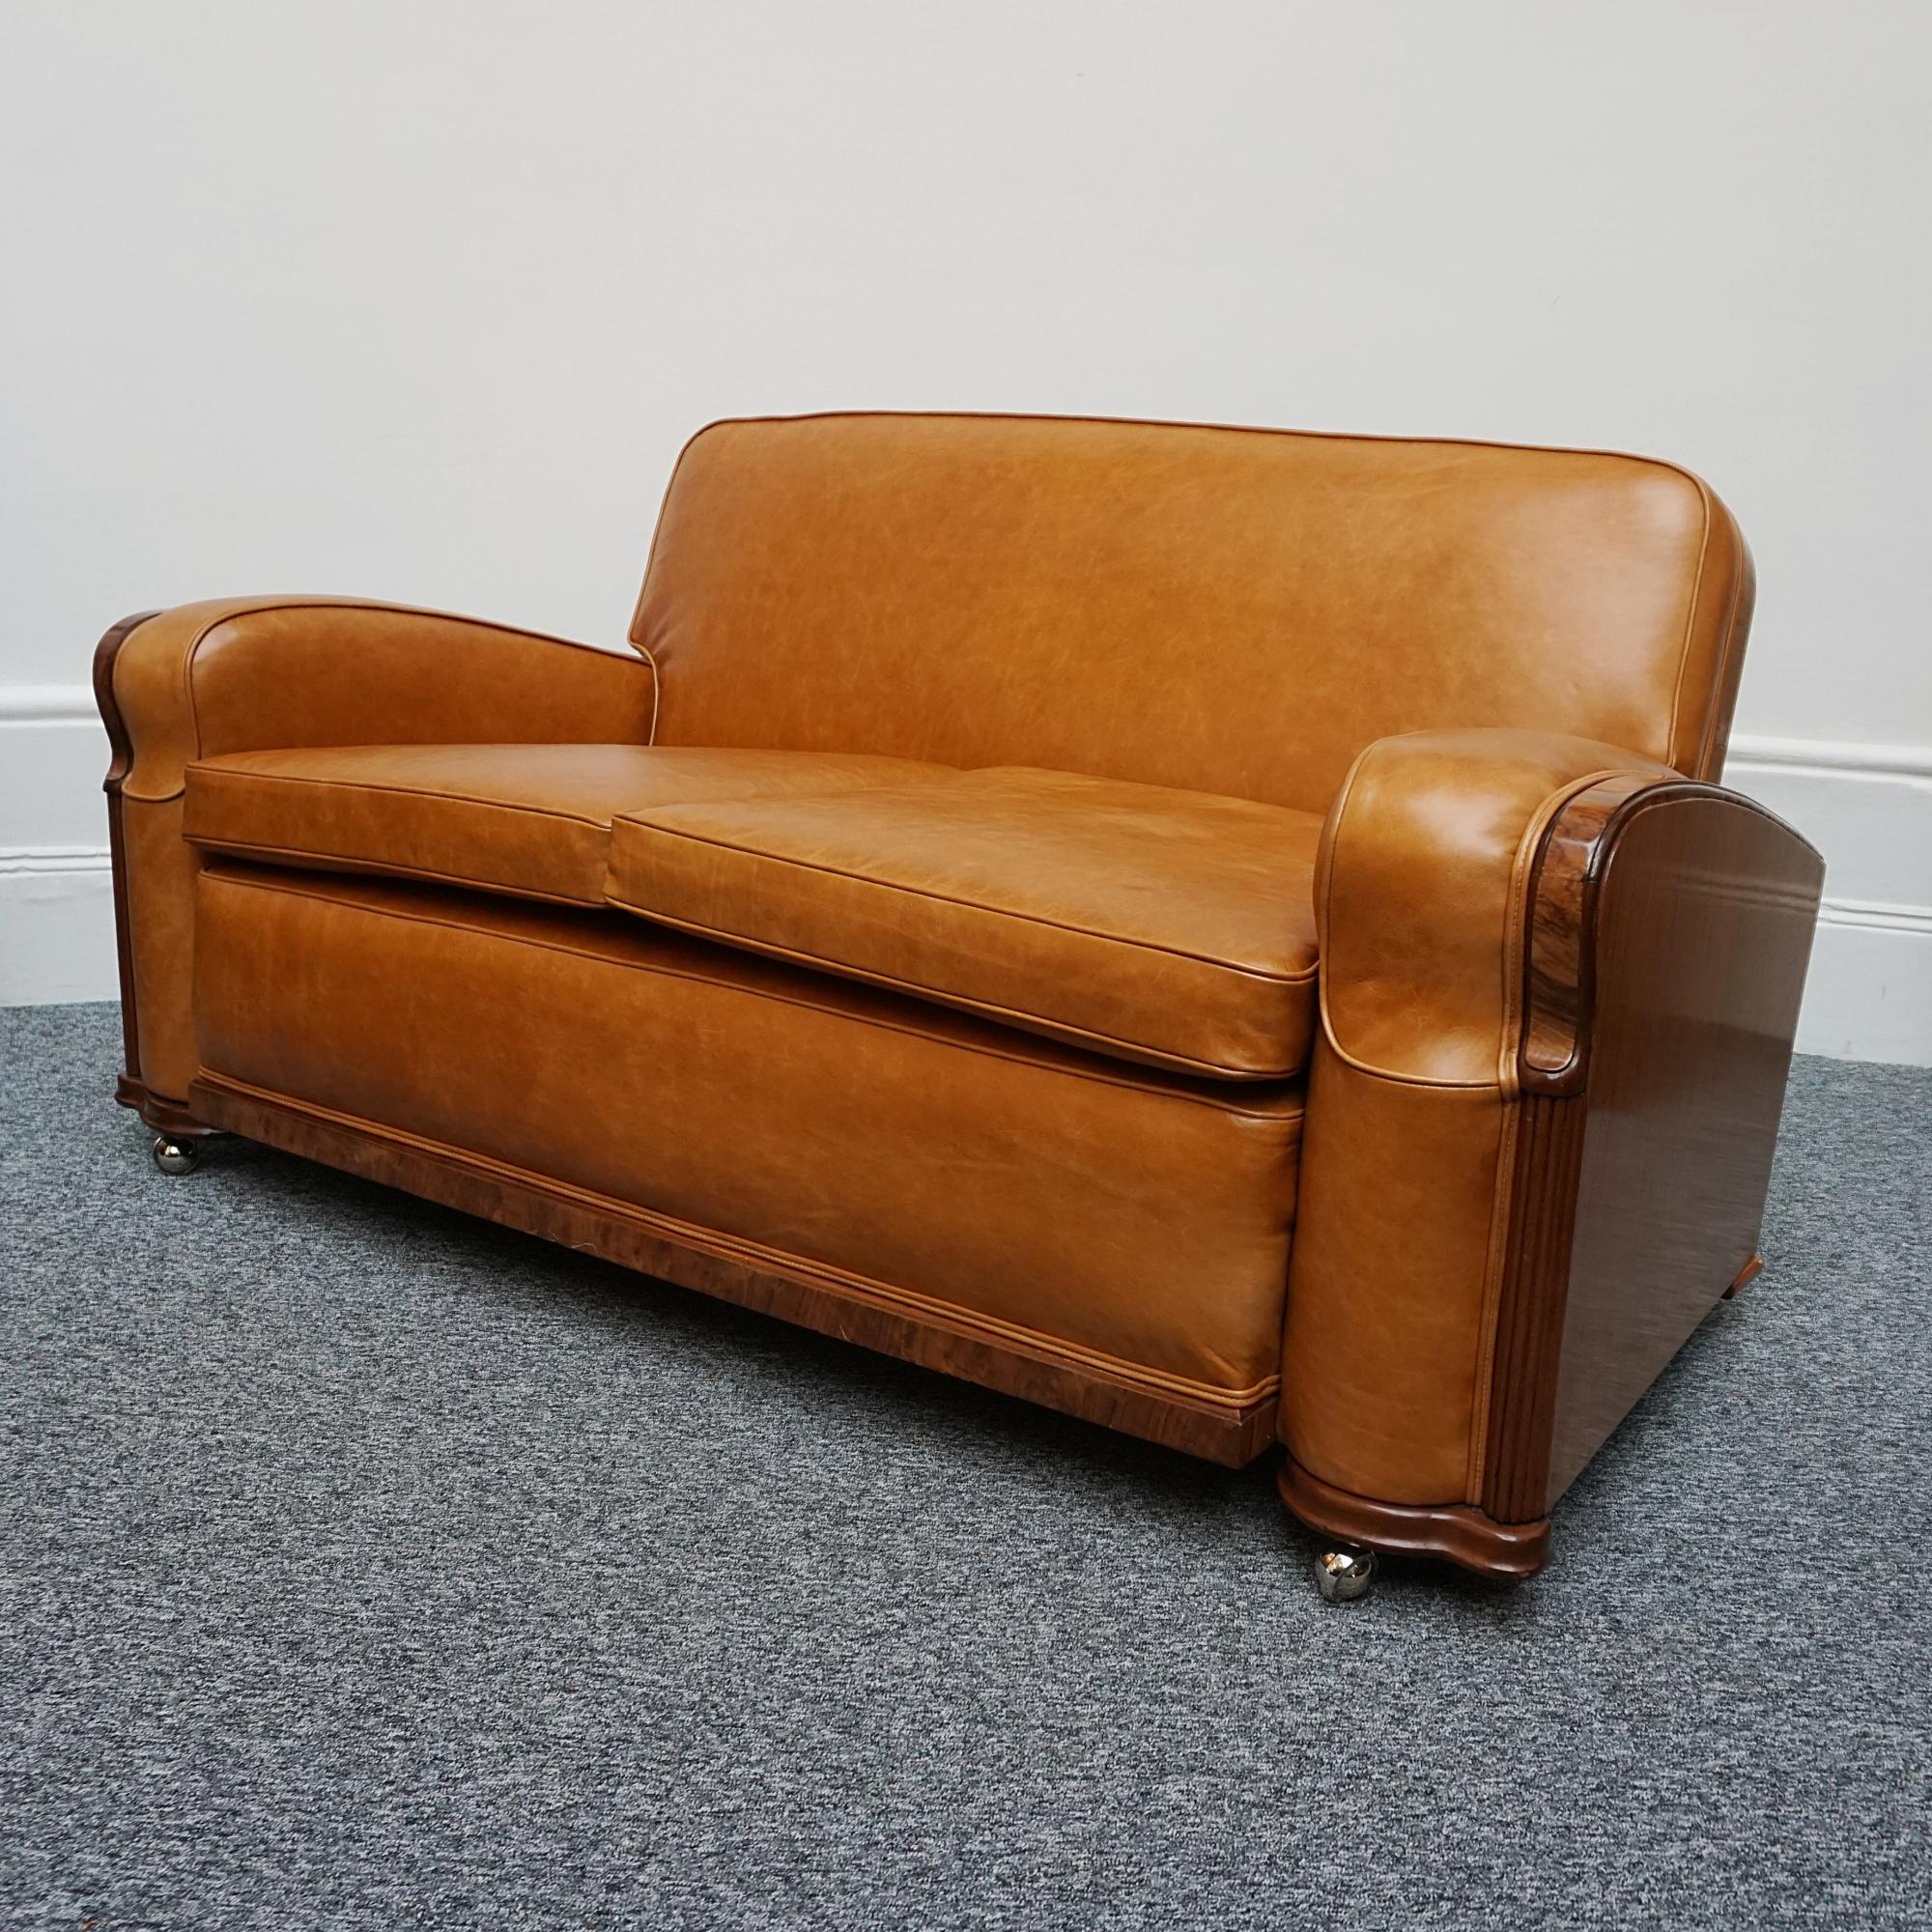 An Original Art Deco Club Sofa with Brown Leather Re-Upholstery  In Good Condition For Sale In Forest Row, East Sussex